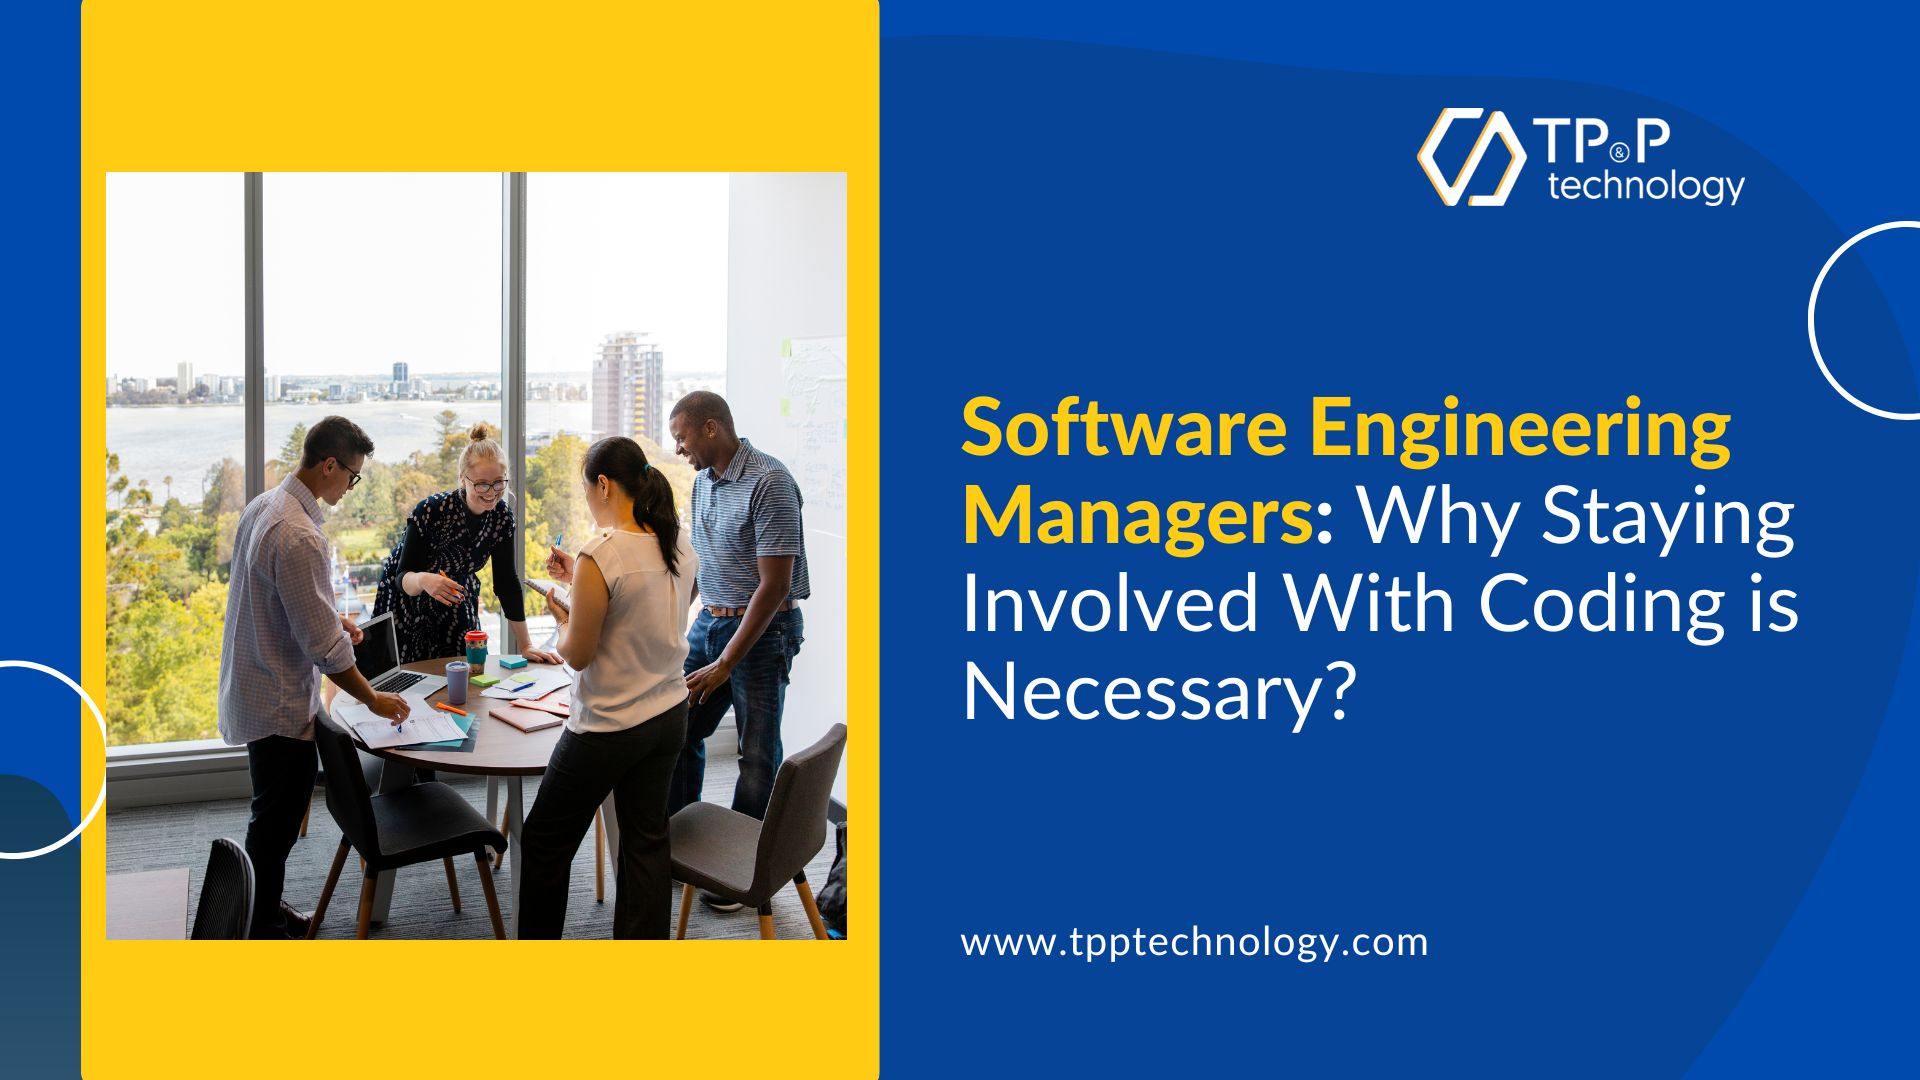 Software Engineering Managers: Why Staying Involved With Coding is Necessary?